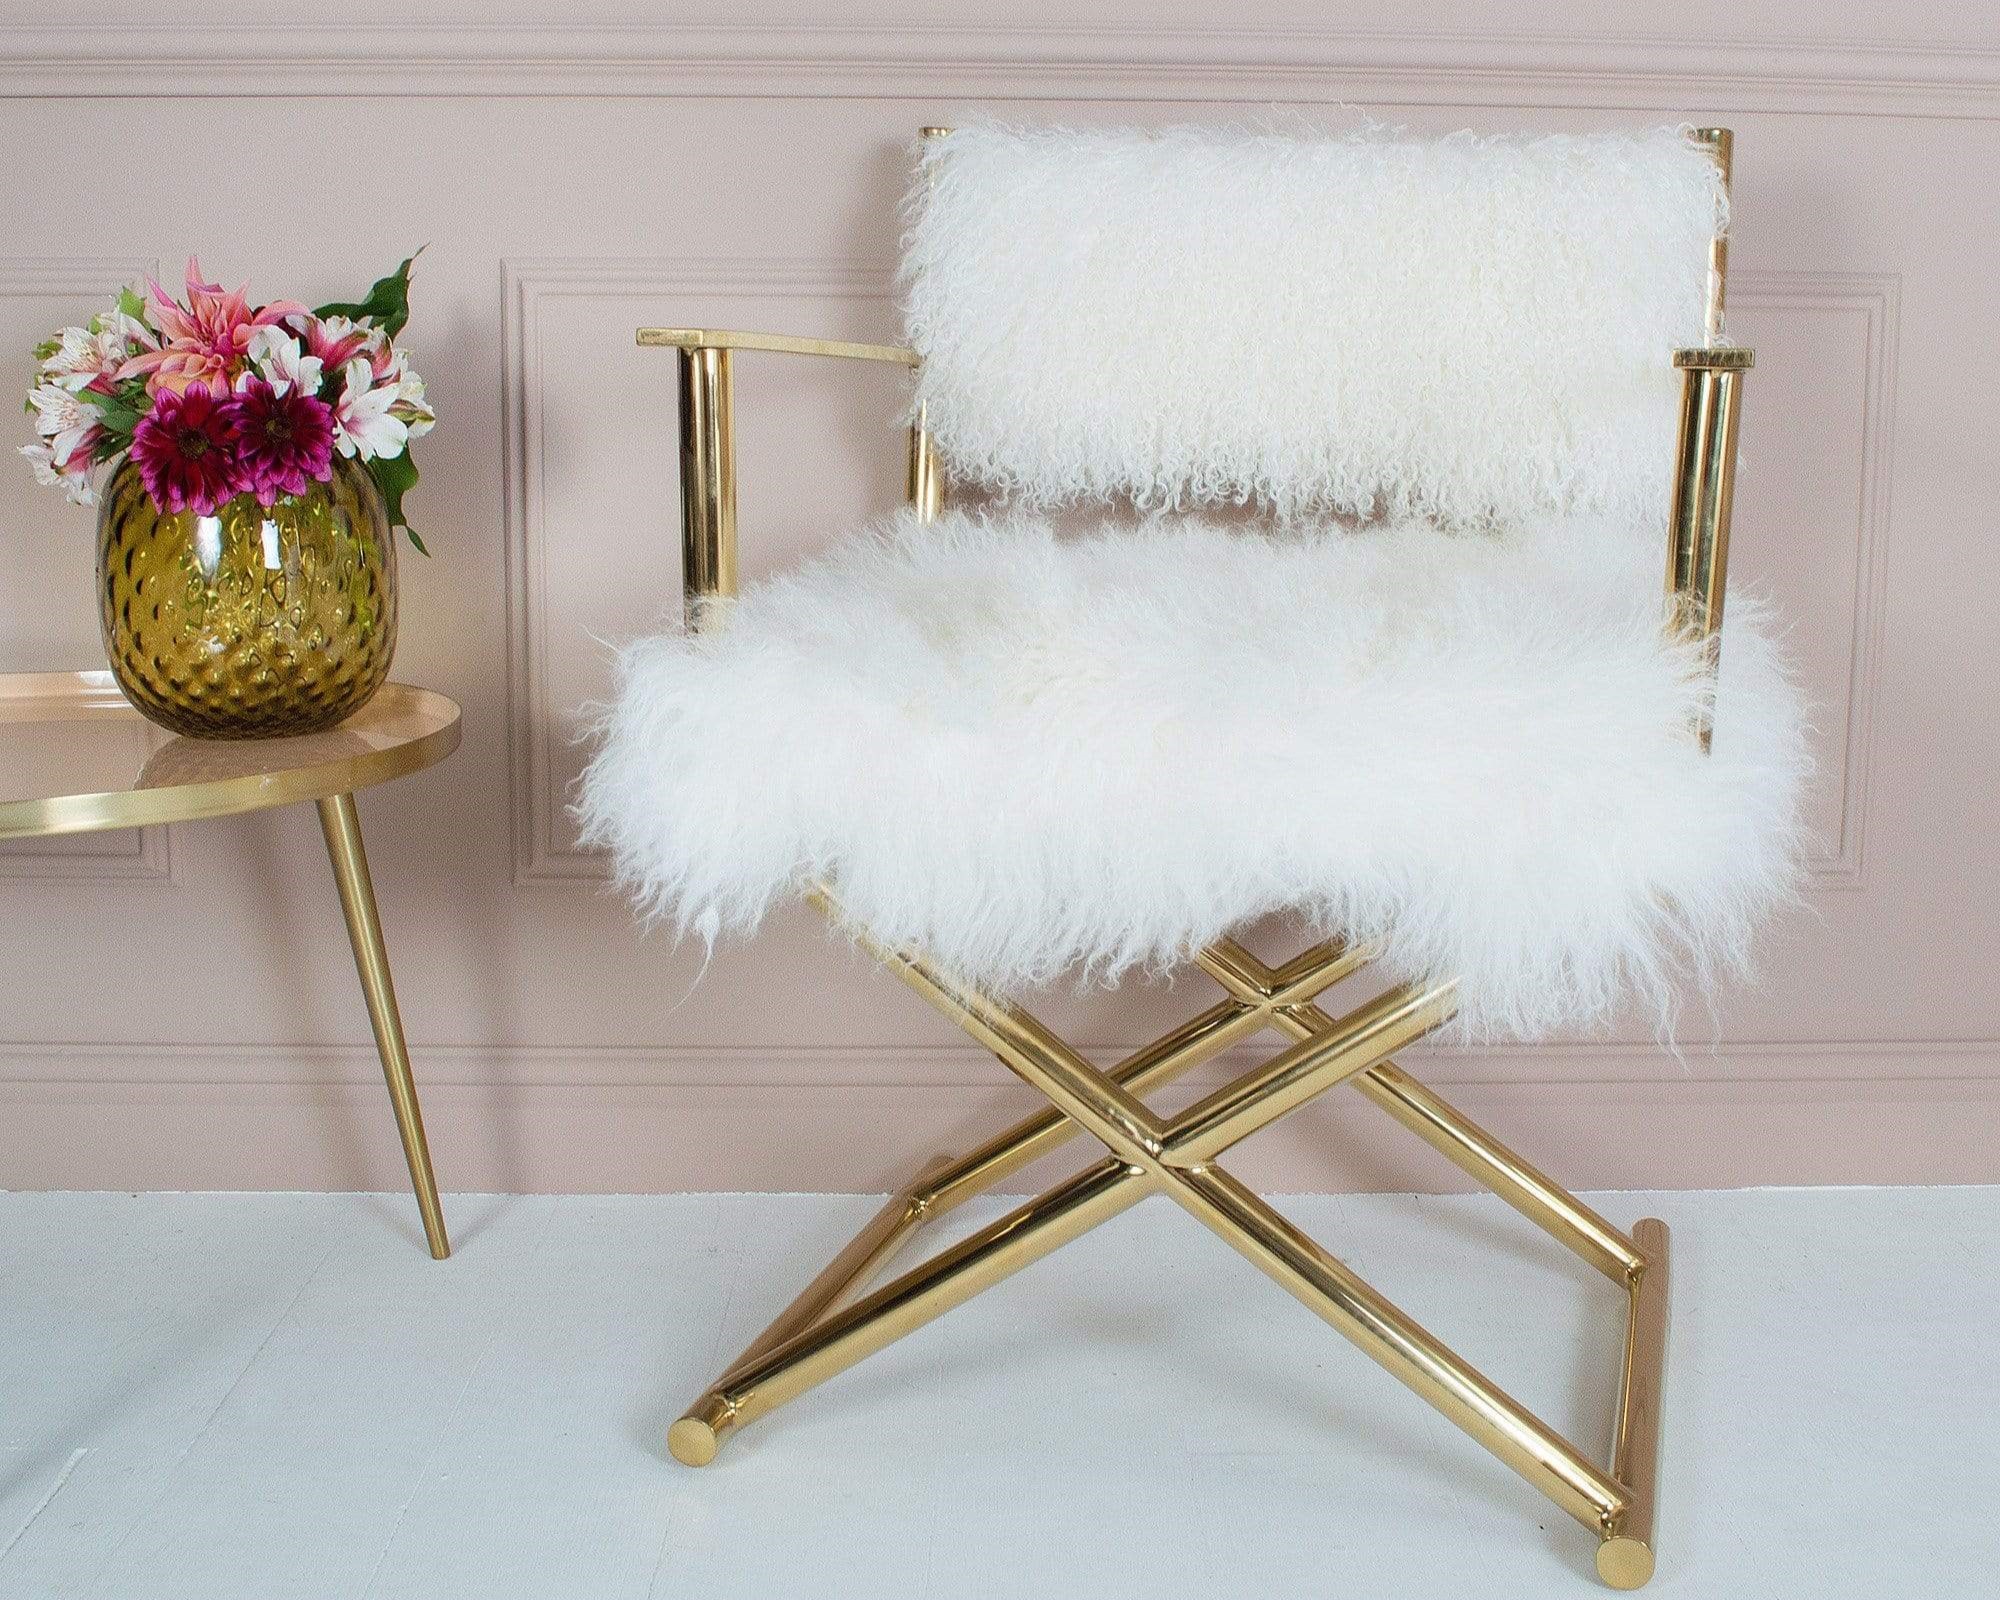 A gold metal framed chair with white fur set against a gold side table and a vase of colorful flowers